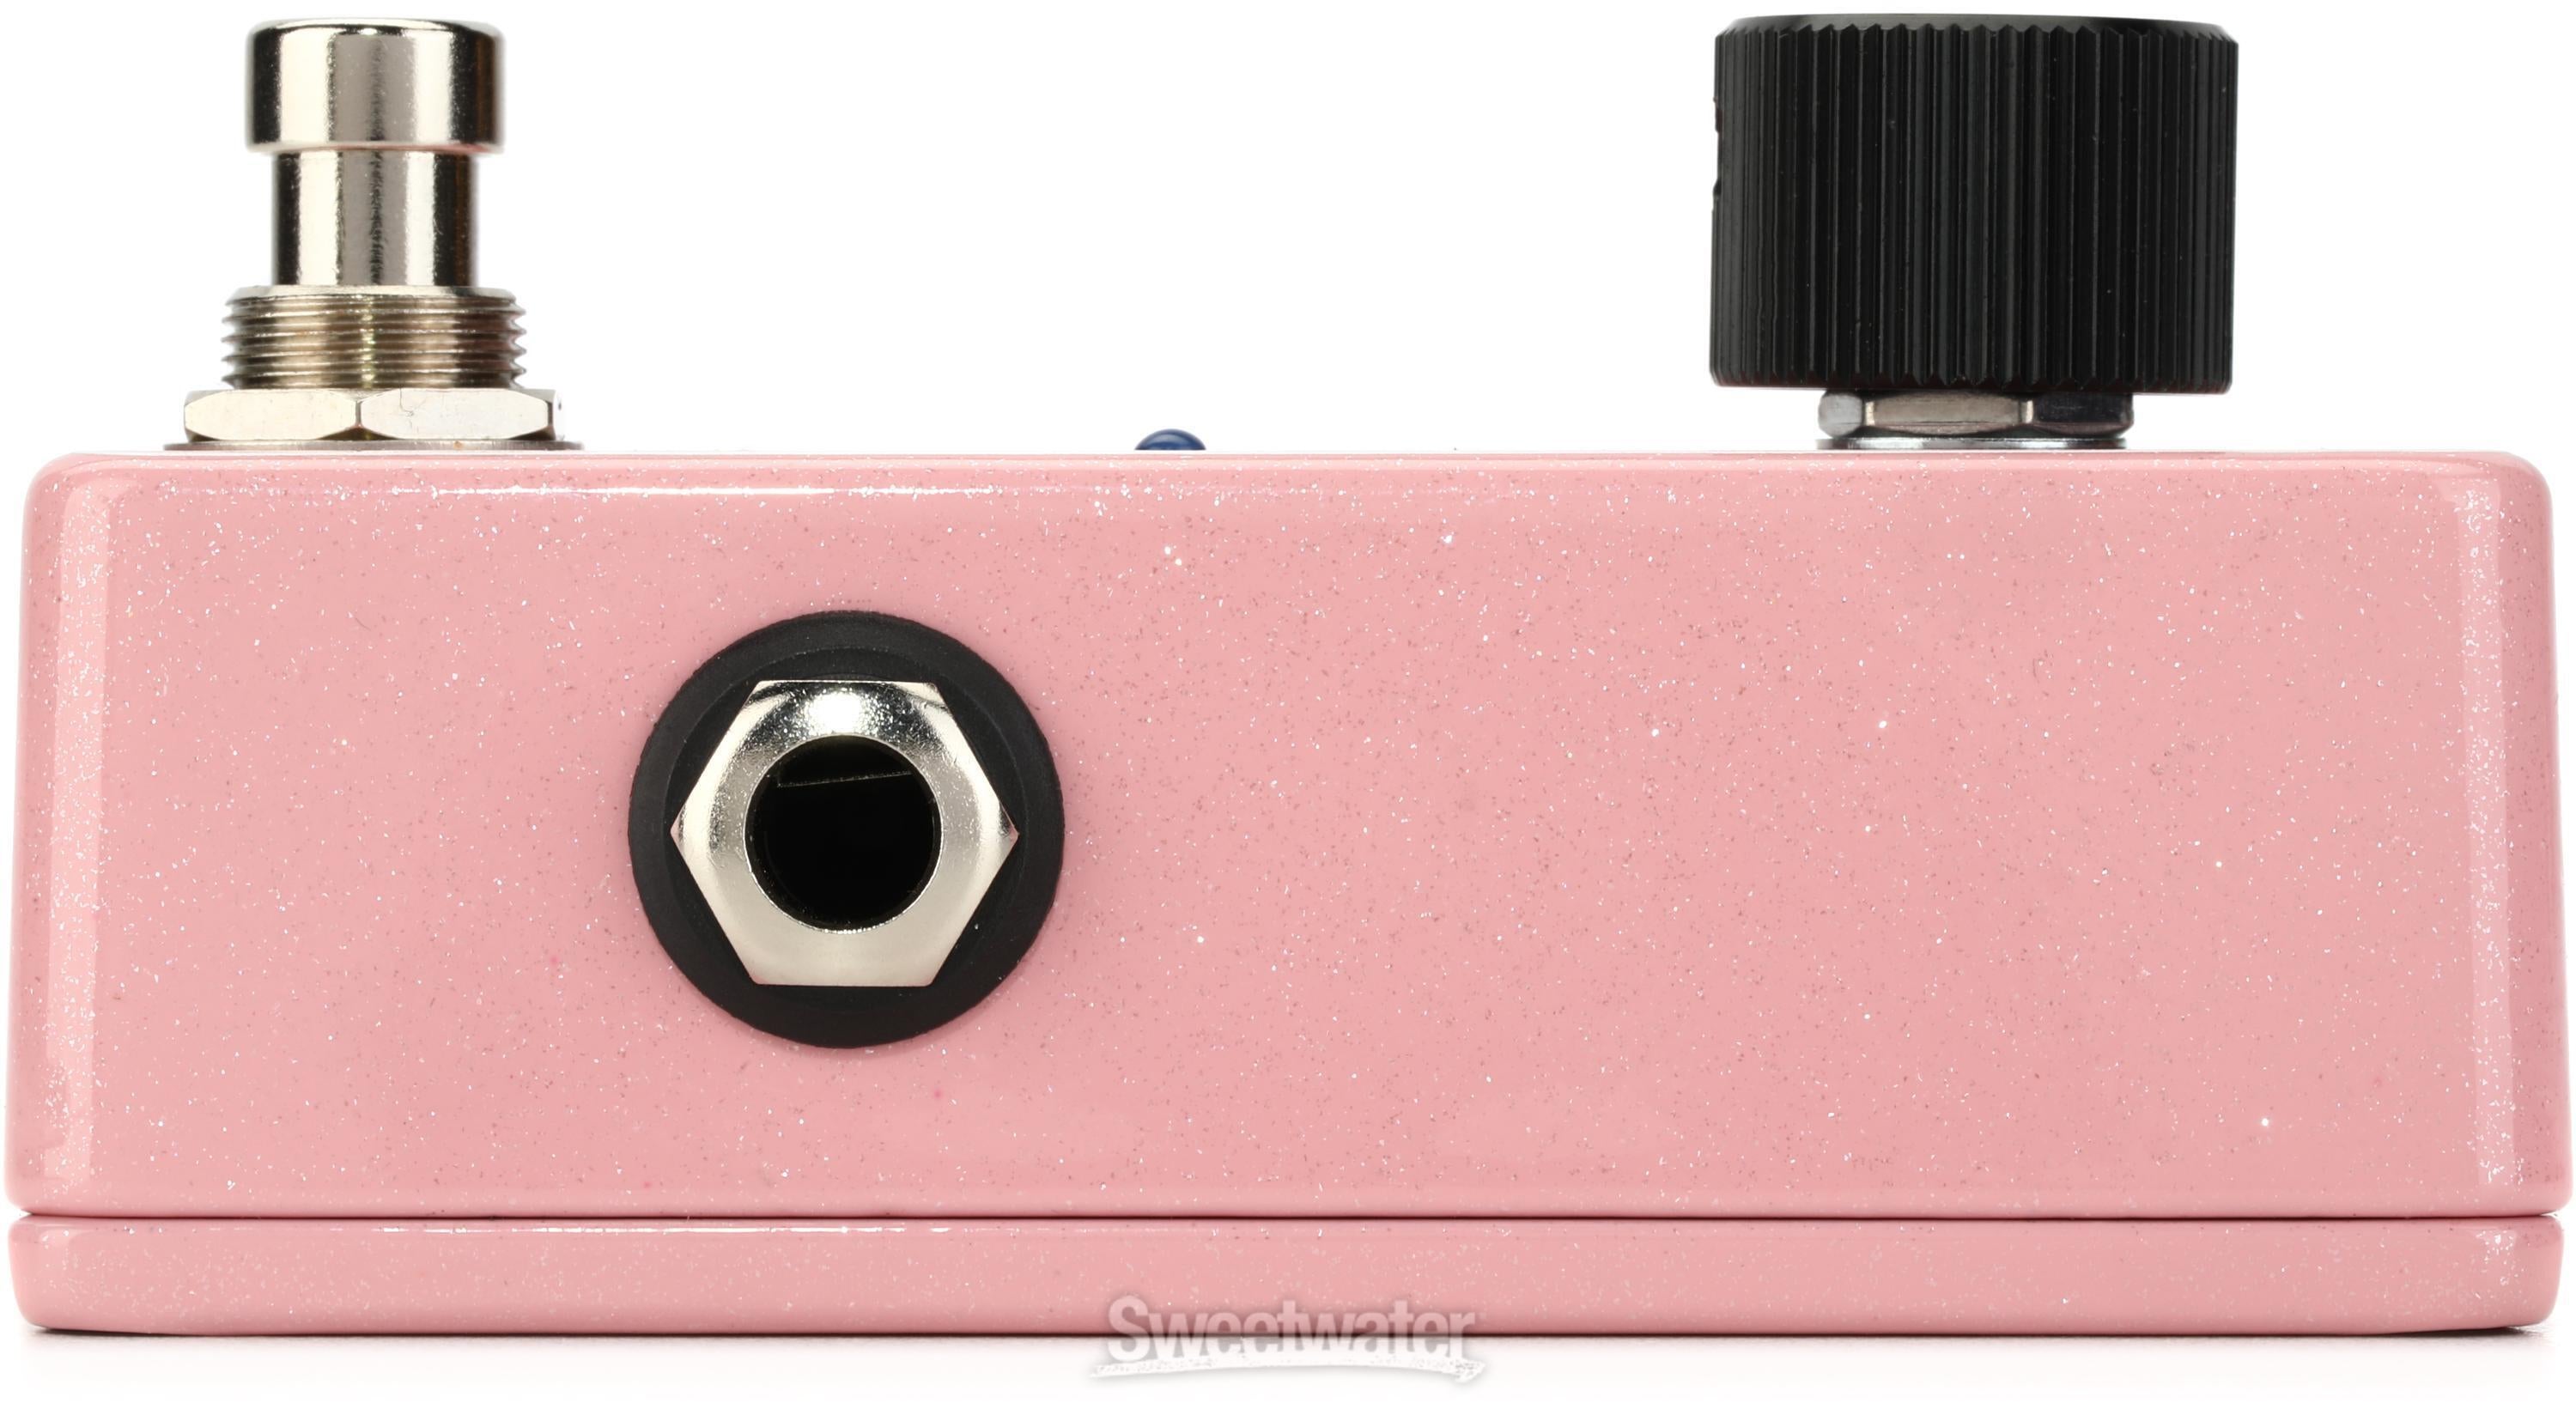 Keeley Mini Katana Clean Boost Pedal - New Light Pink, Sweetwater Exclusive